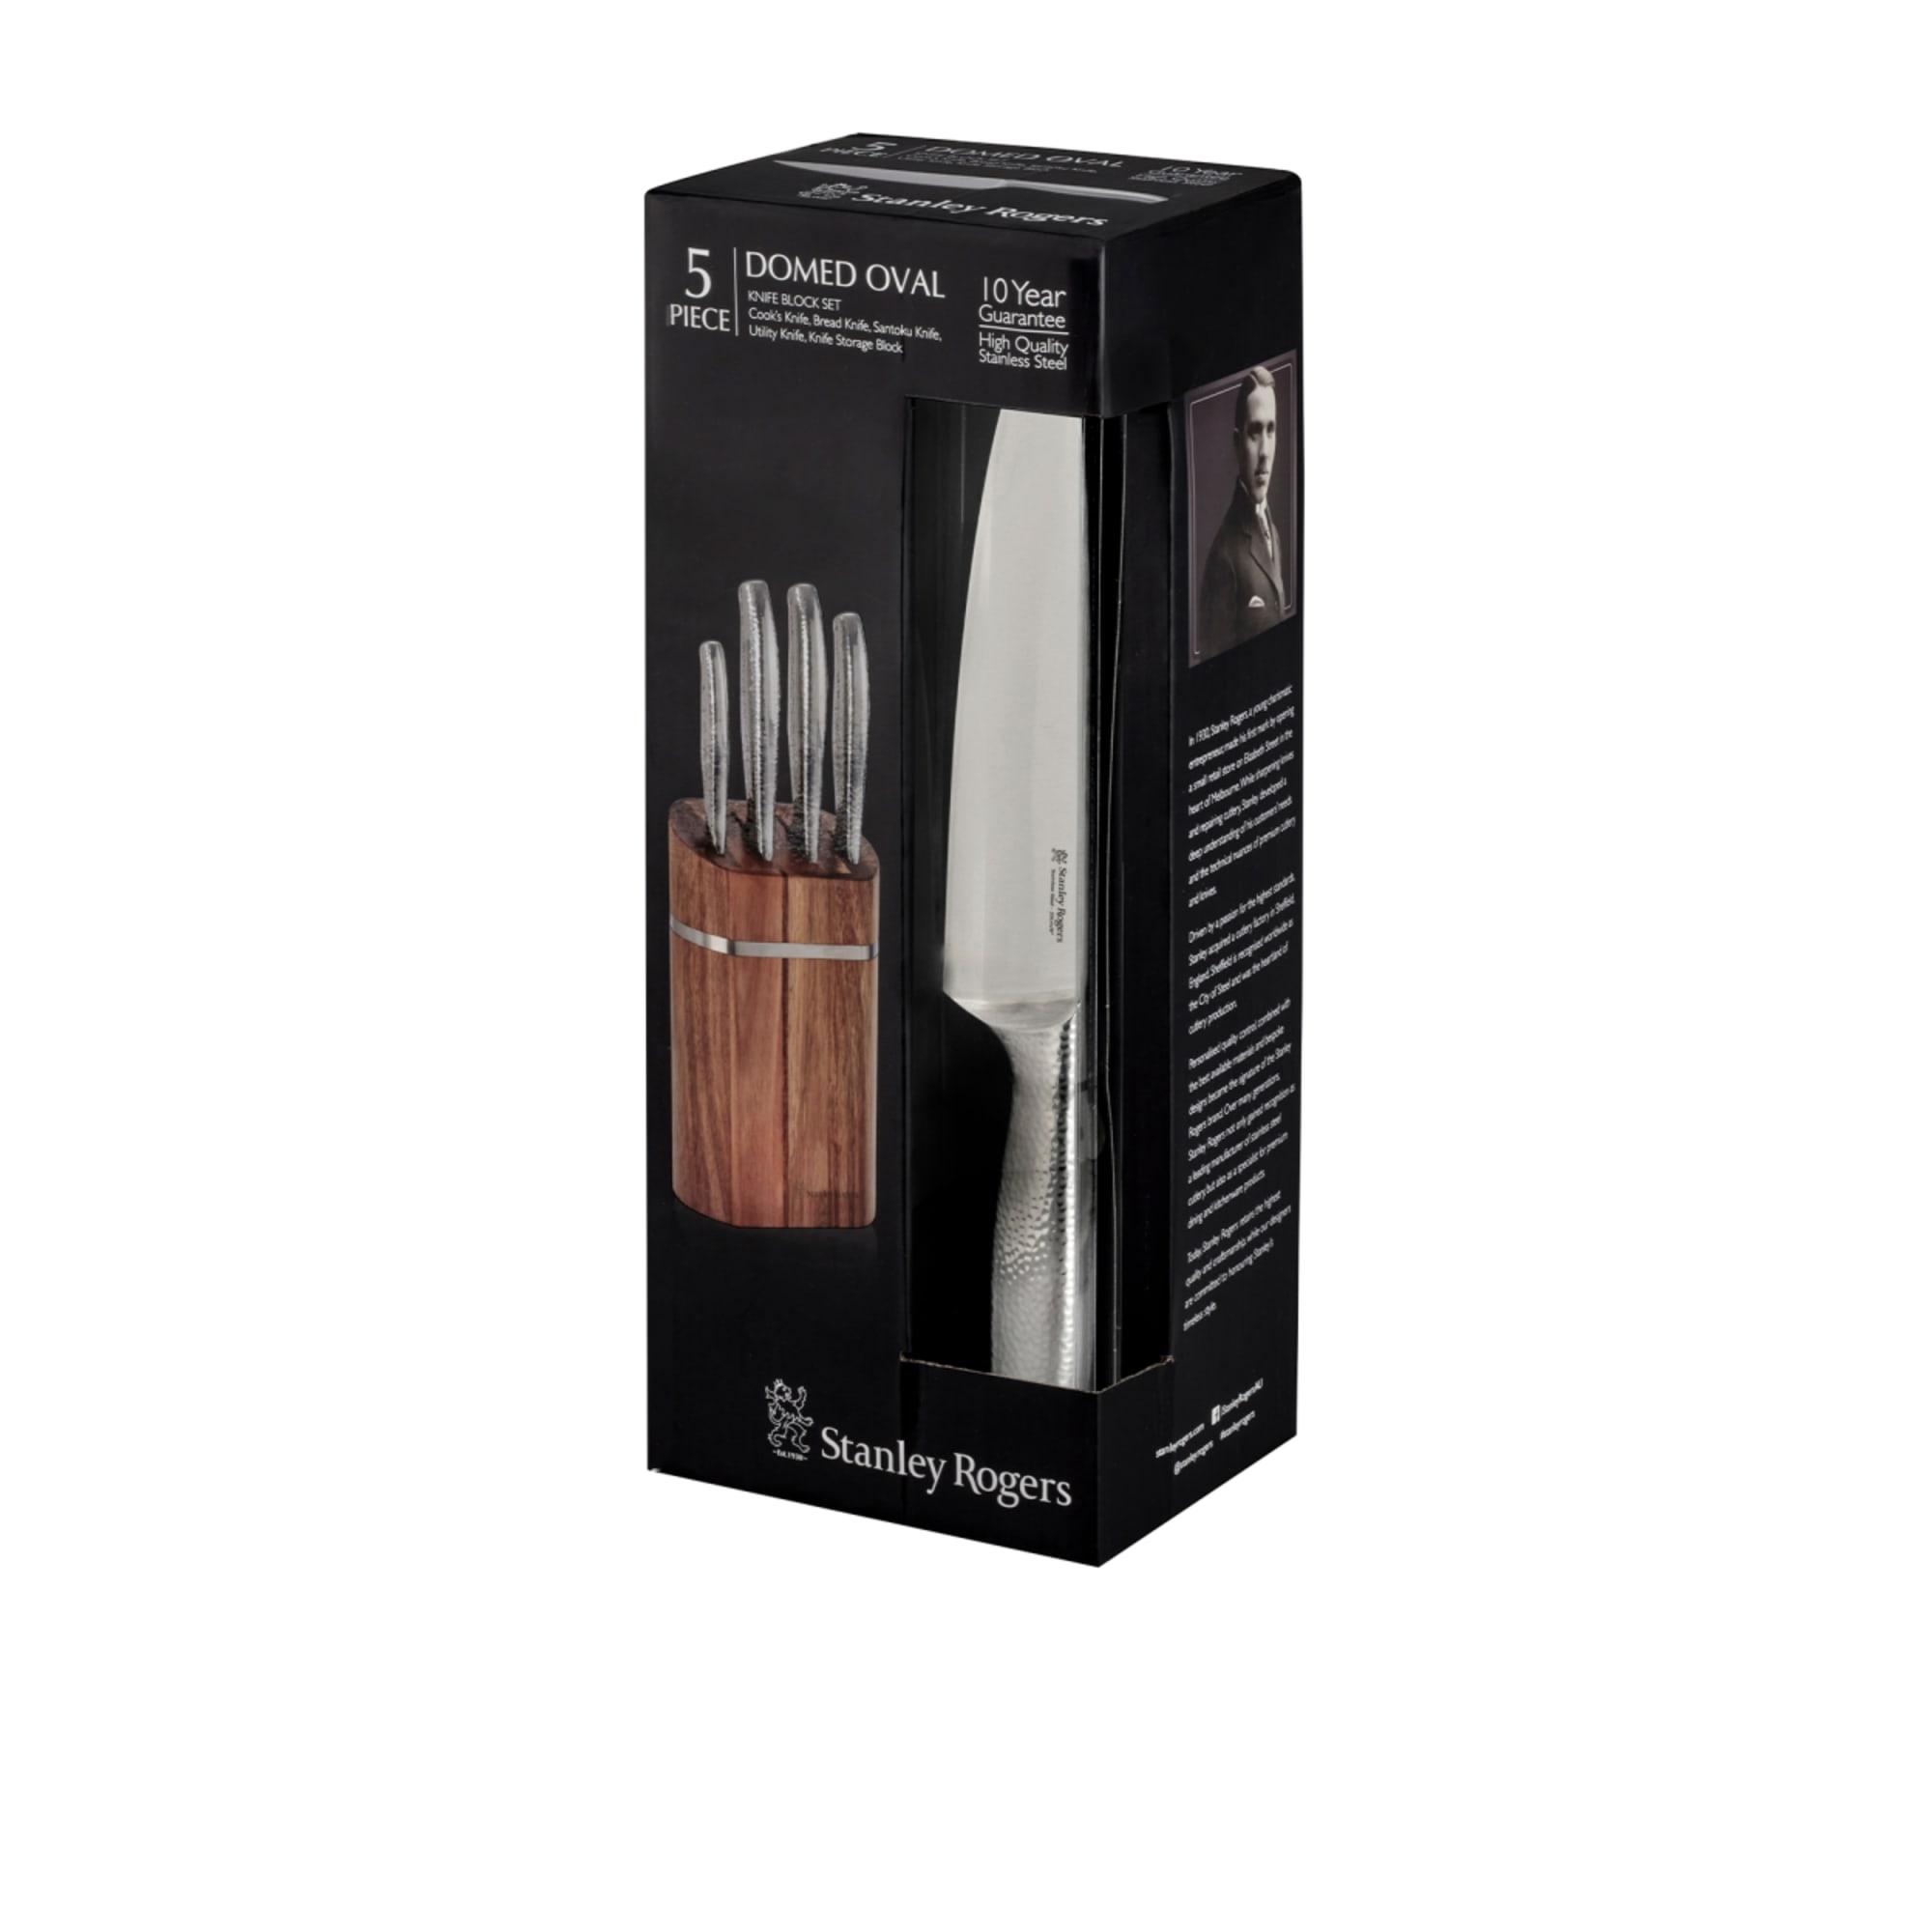 Stanley Rogers 5pc Oval Domed Knife Block Set Image 4